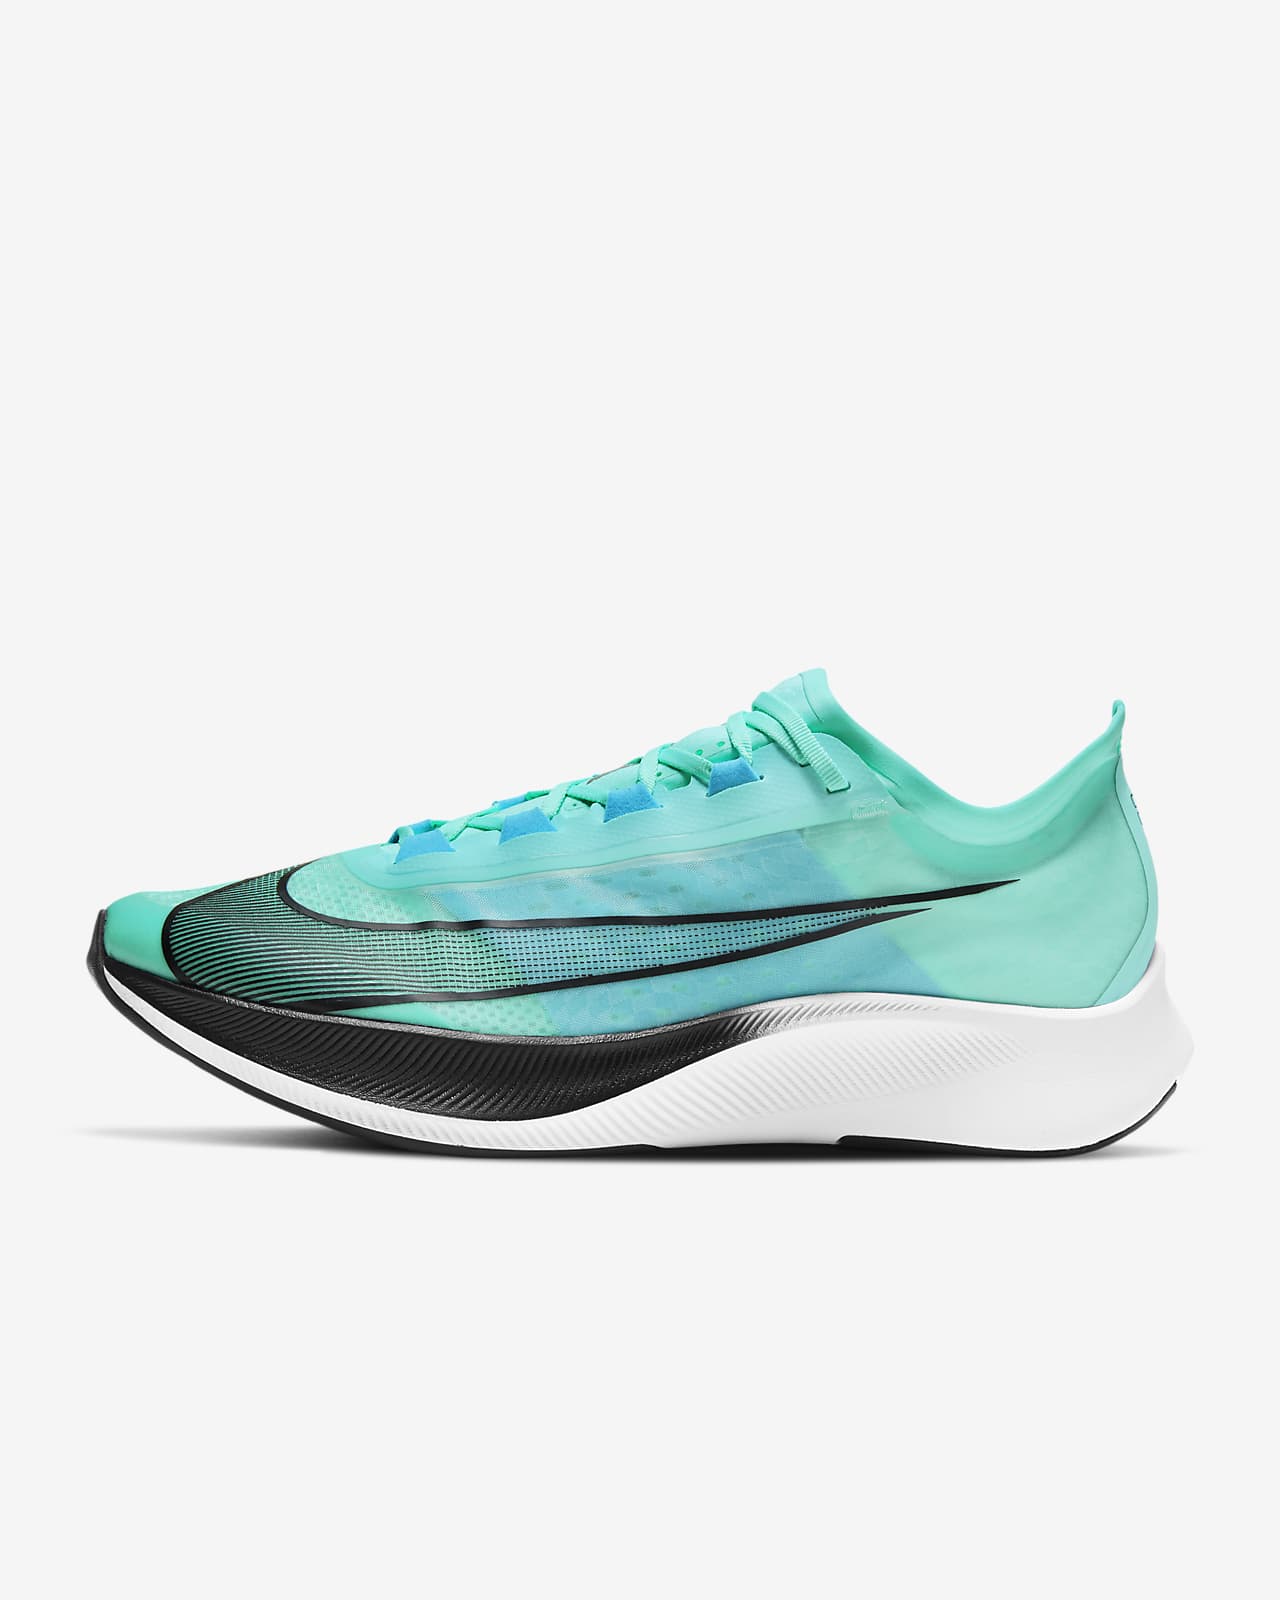 nike zoom fly 3 size 11